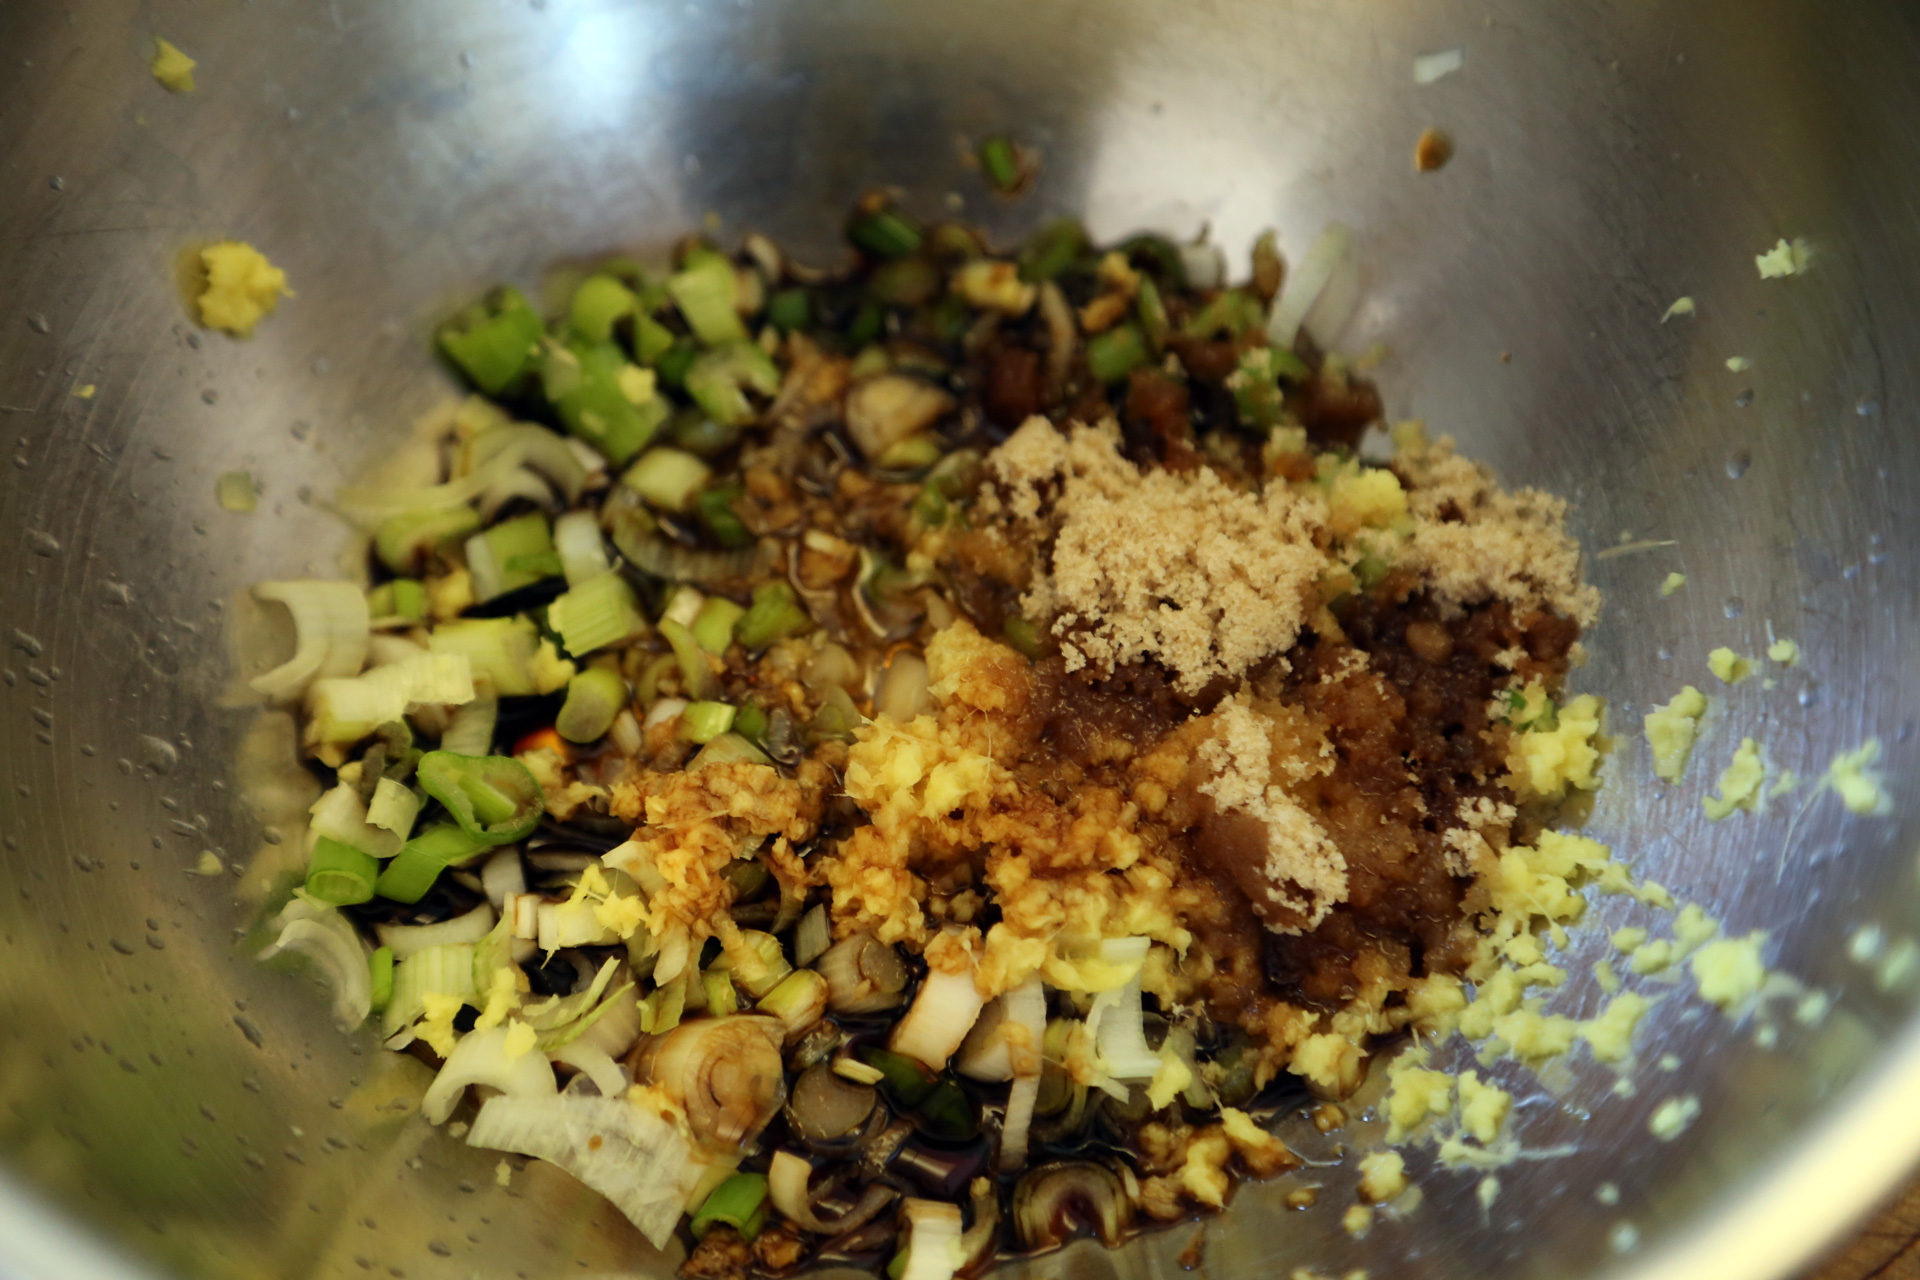 In a bowl, whisk together the green onions, soy sauce, sesame oil, sugar, and ginger.